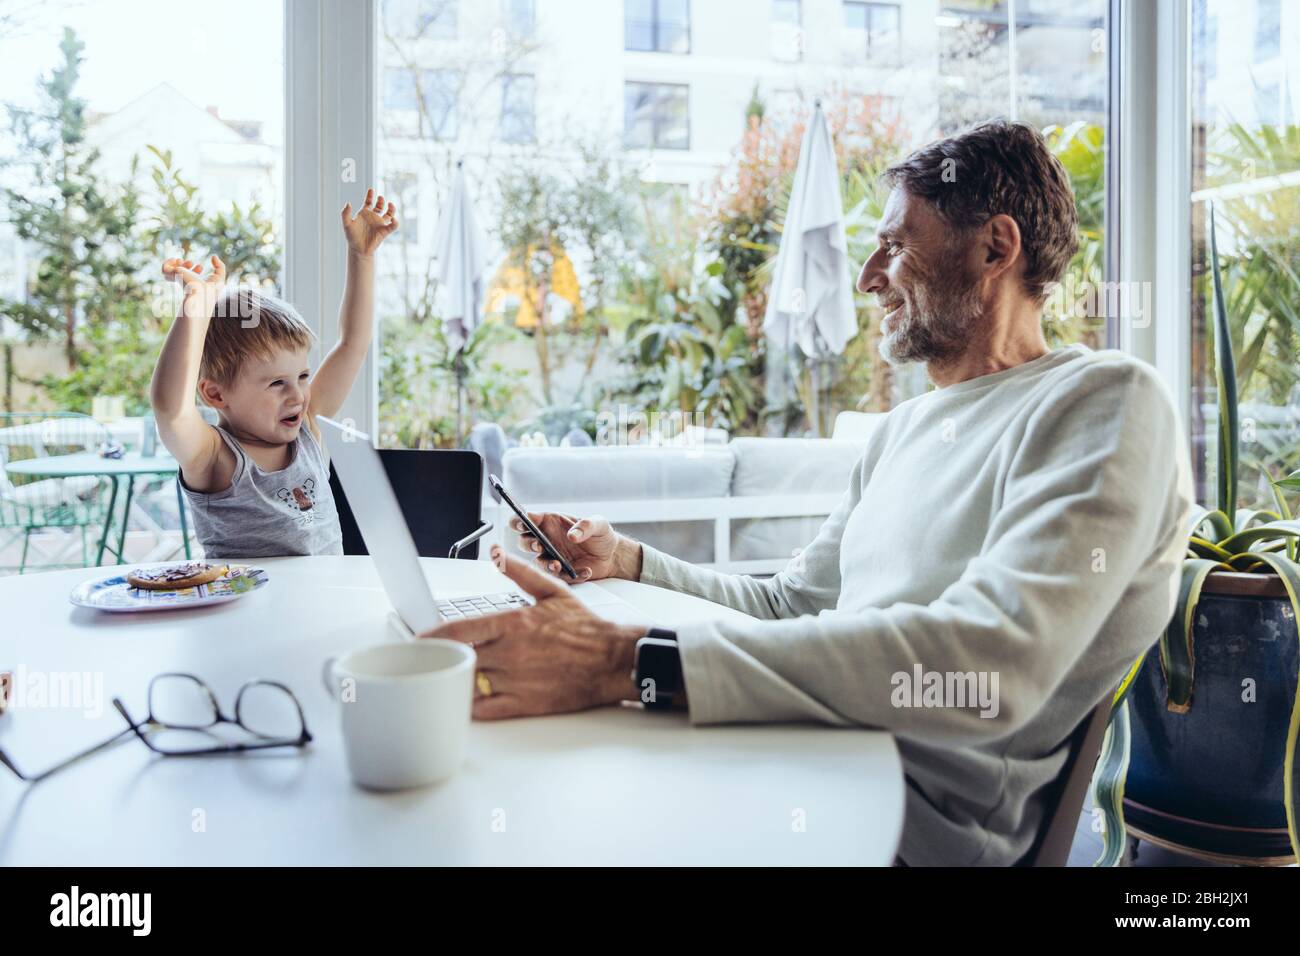 Little boy trying to get attention, while father is working from home Stock Photo